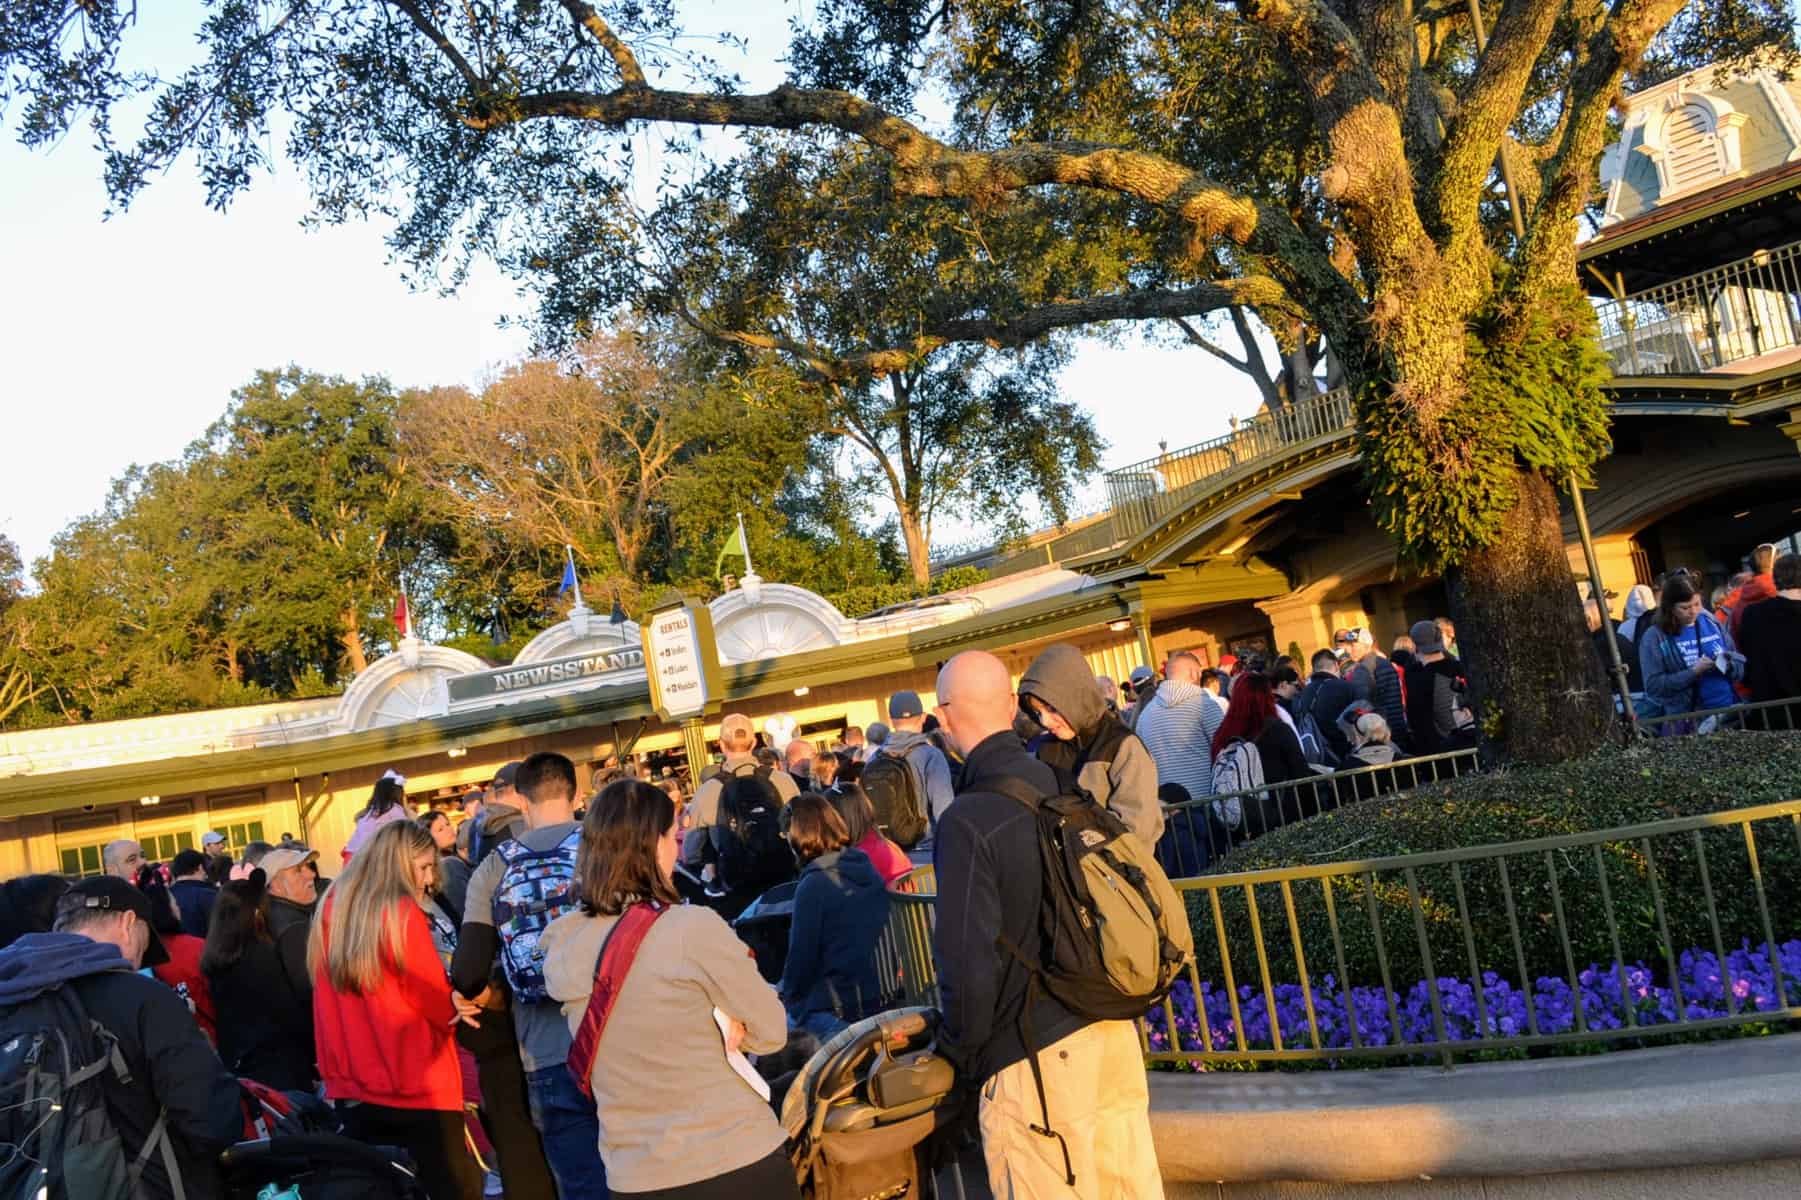 11 tips for handling the crowds at Disney World